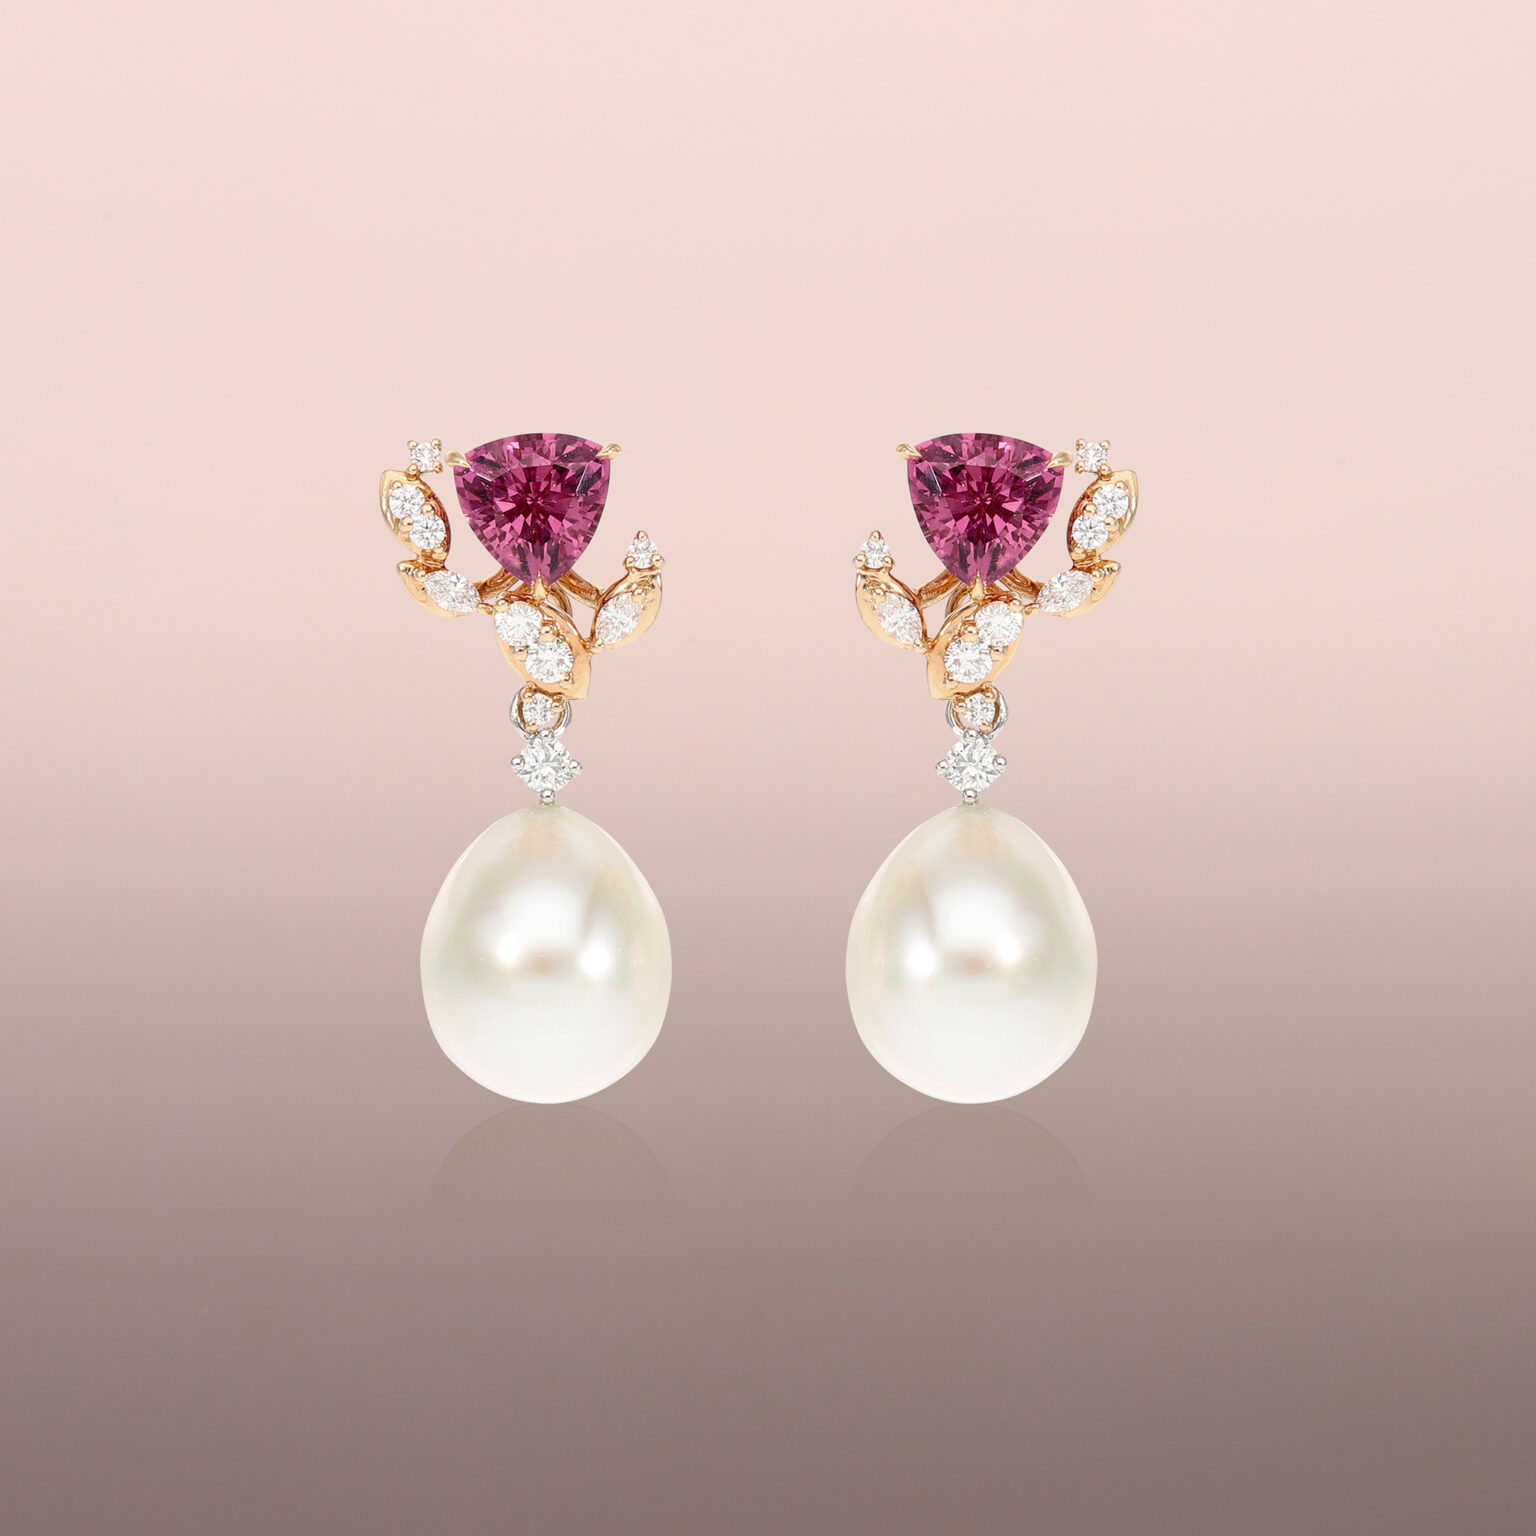 Pearl drop earrings with round brilliant diamonds